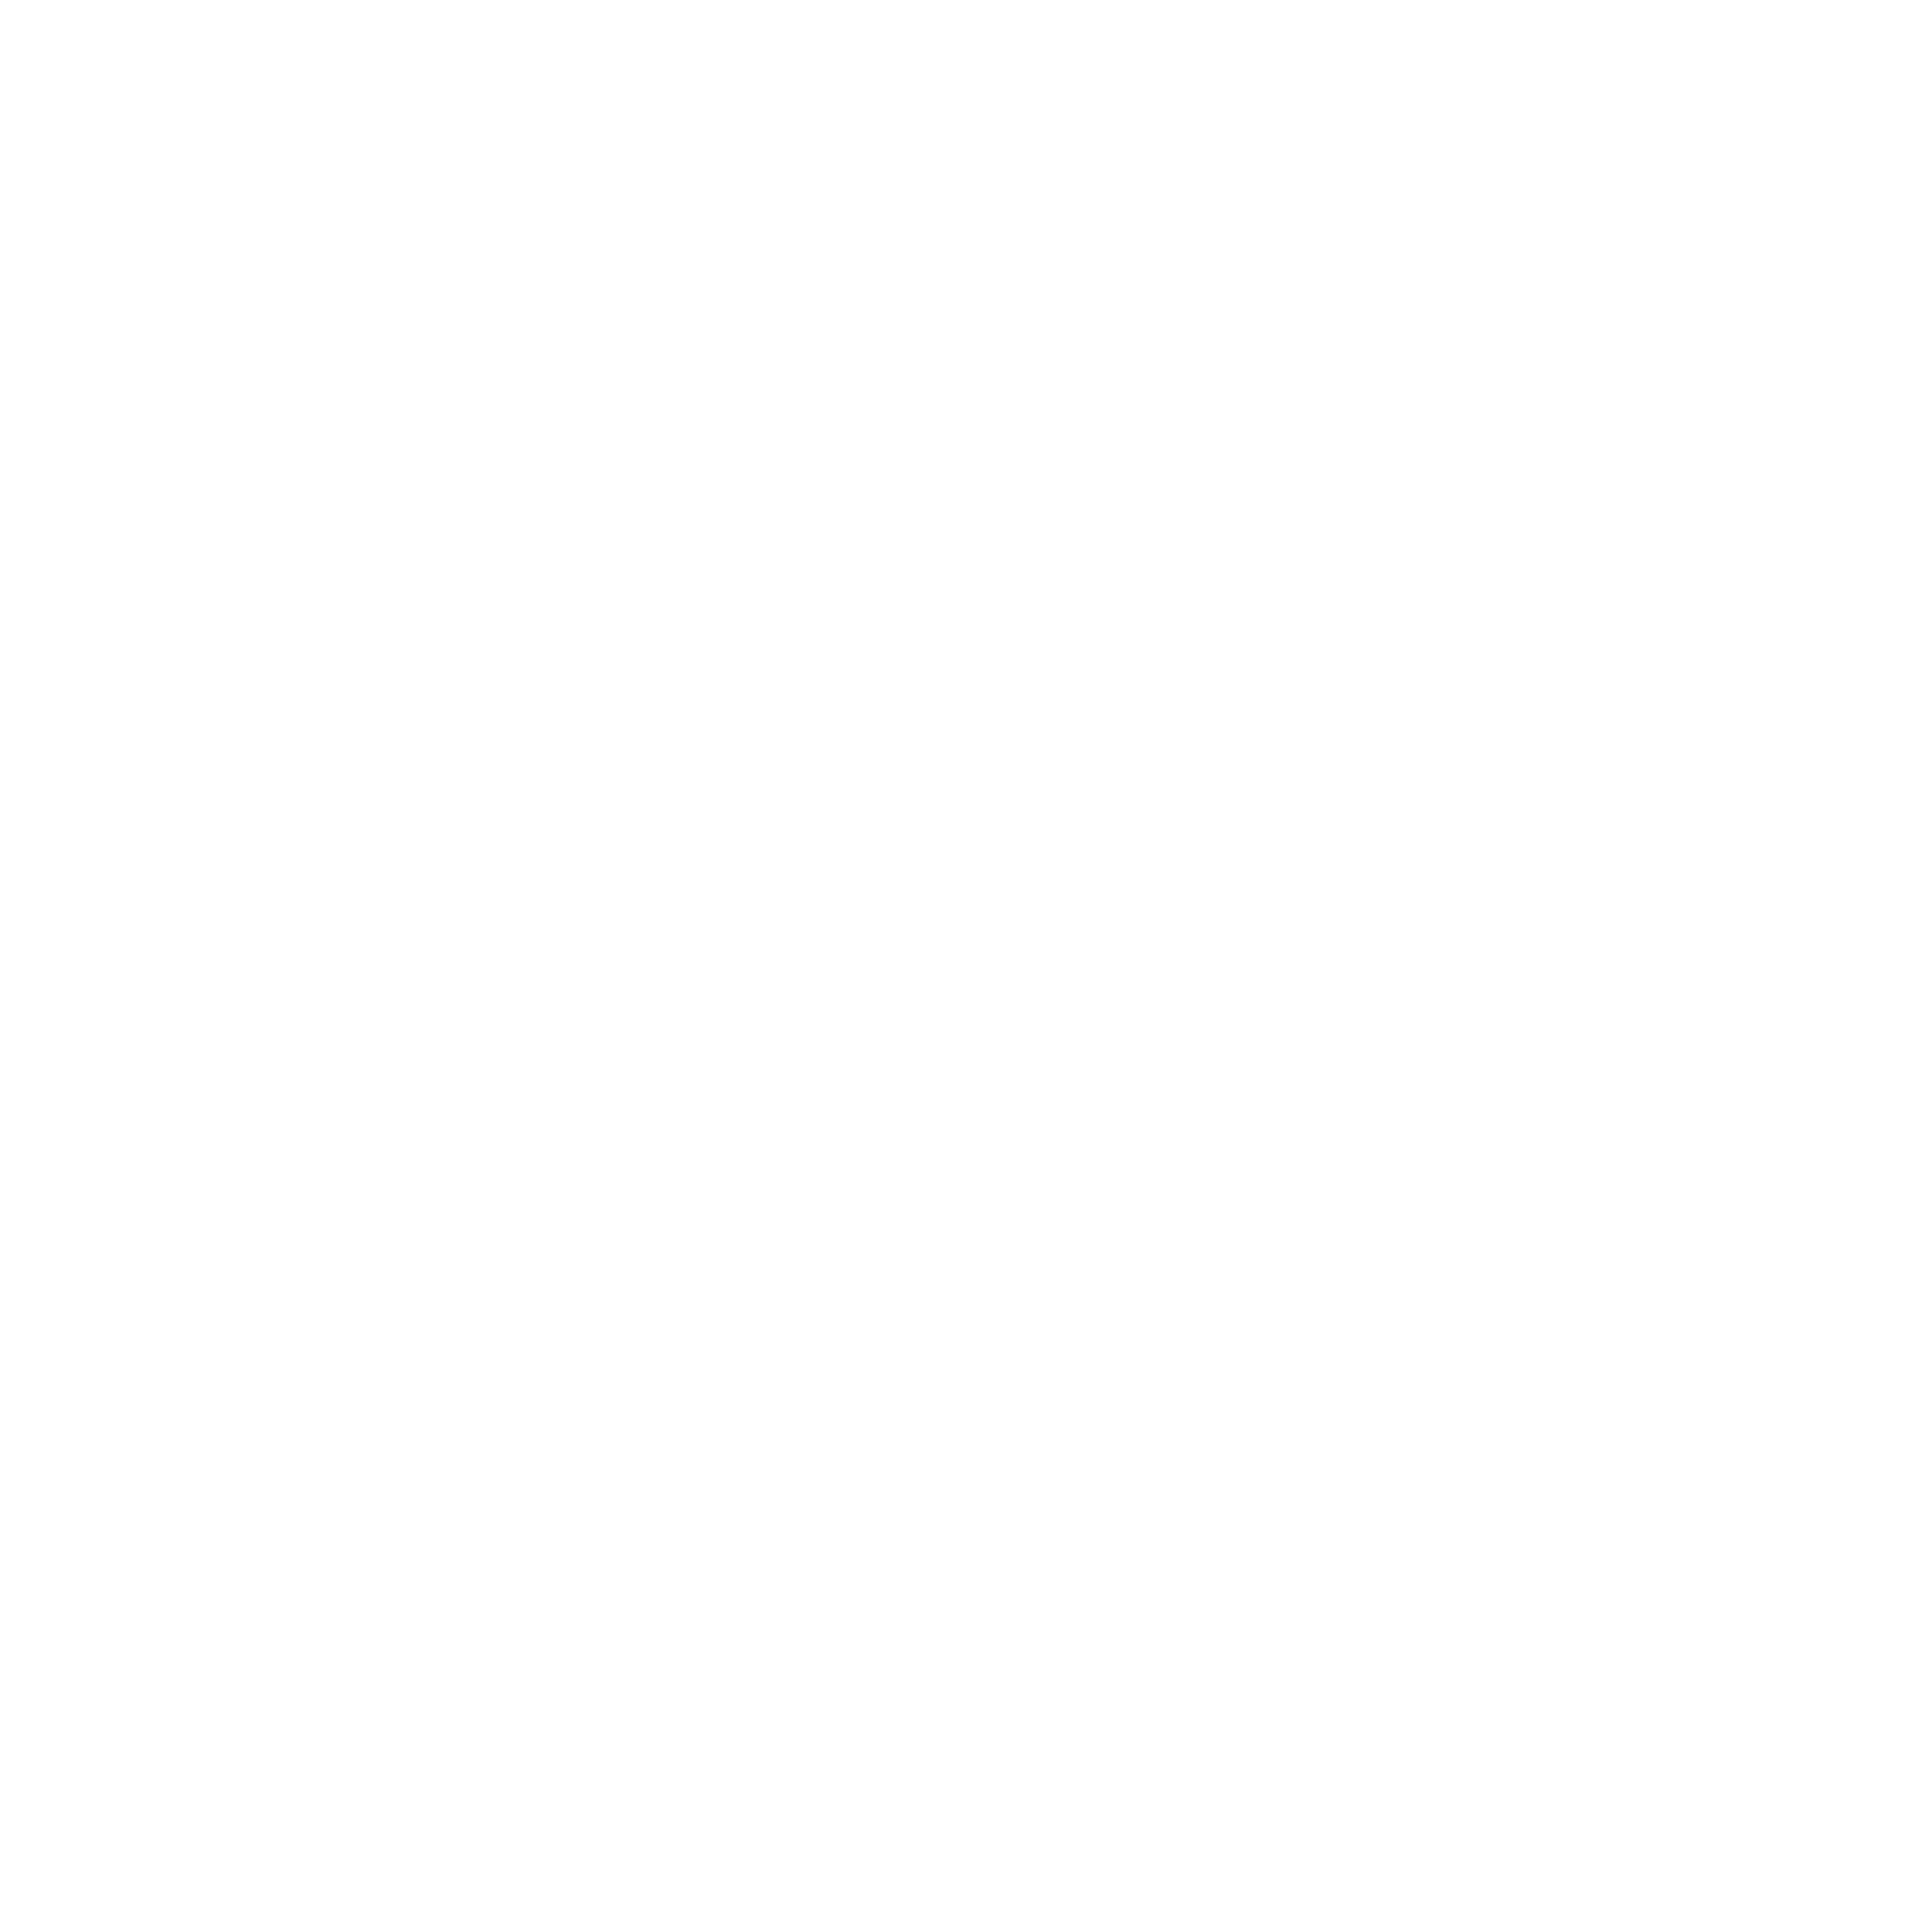 She Lifts by Brooke Rooney